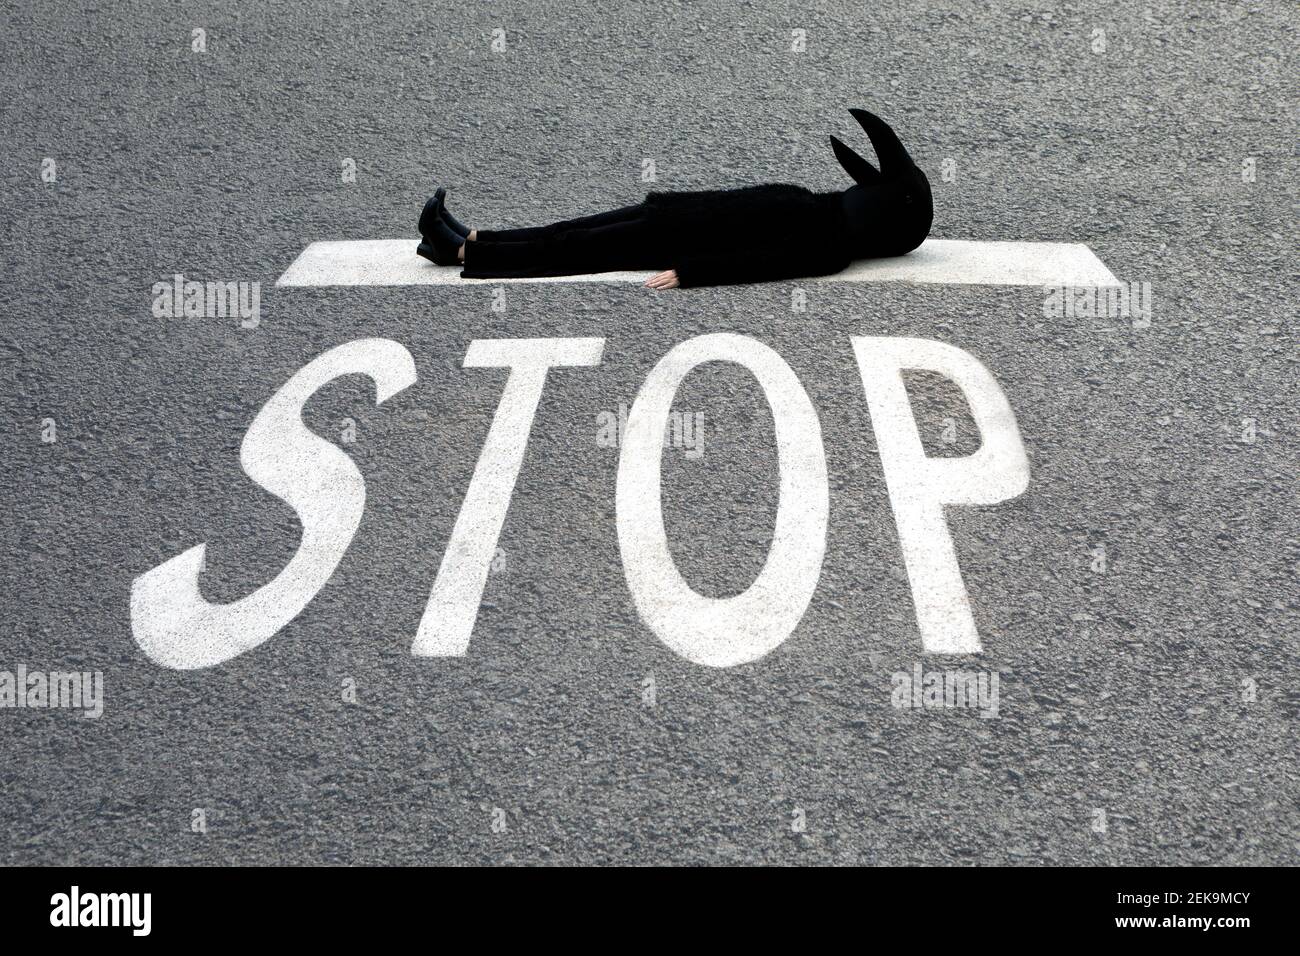 Female in crow costume lying down at STOP sign on road Stock Photo